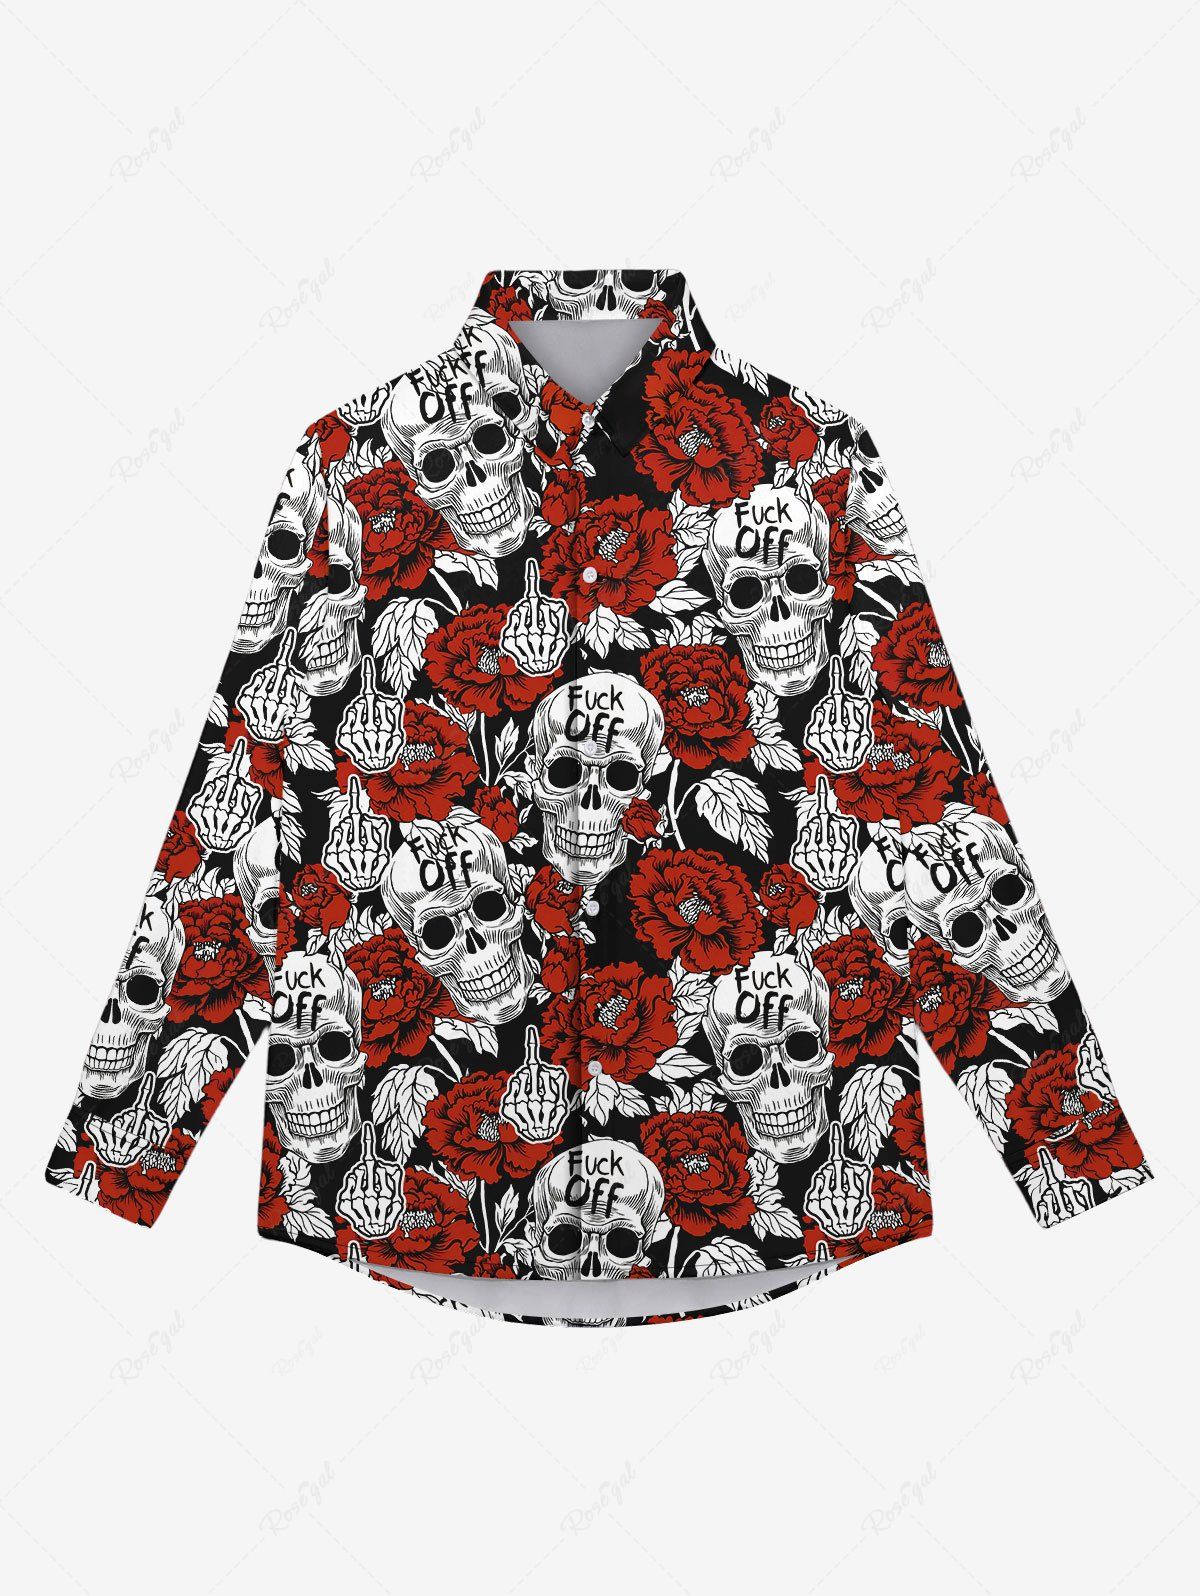 Affordable Gothic Flowers Skulls Skeleton Claw Print Button Down Shirt For Men  